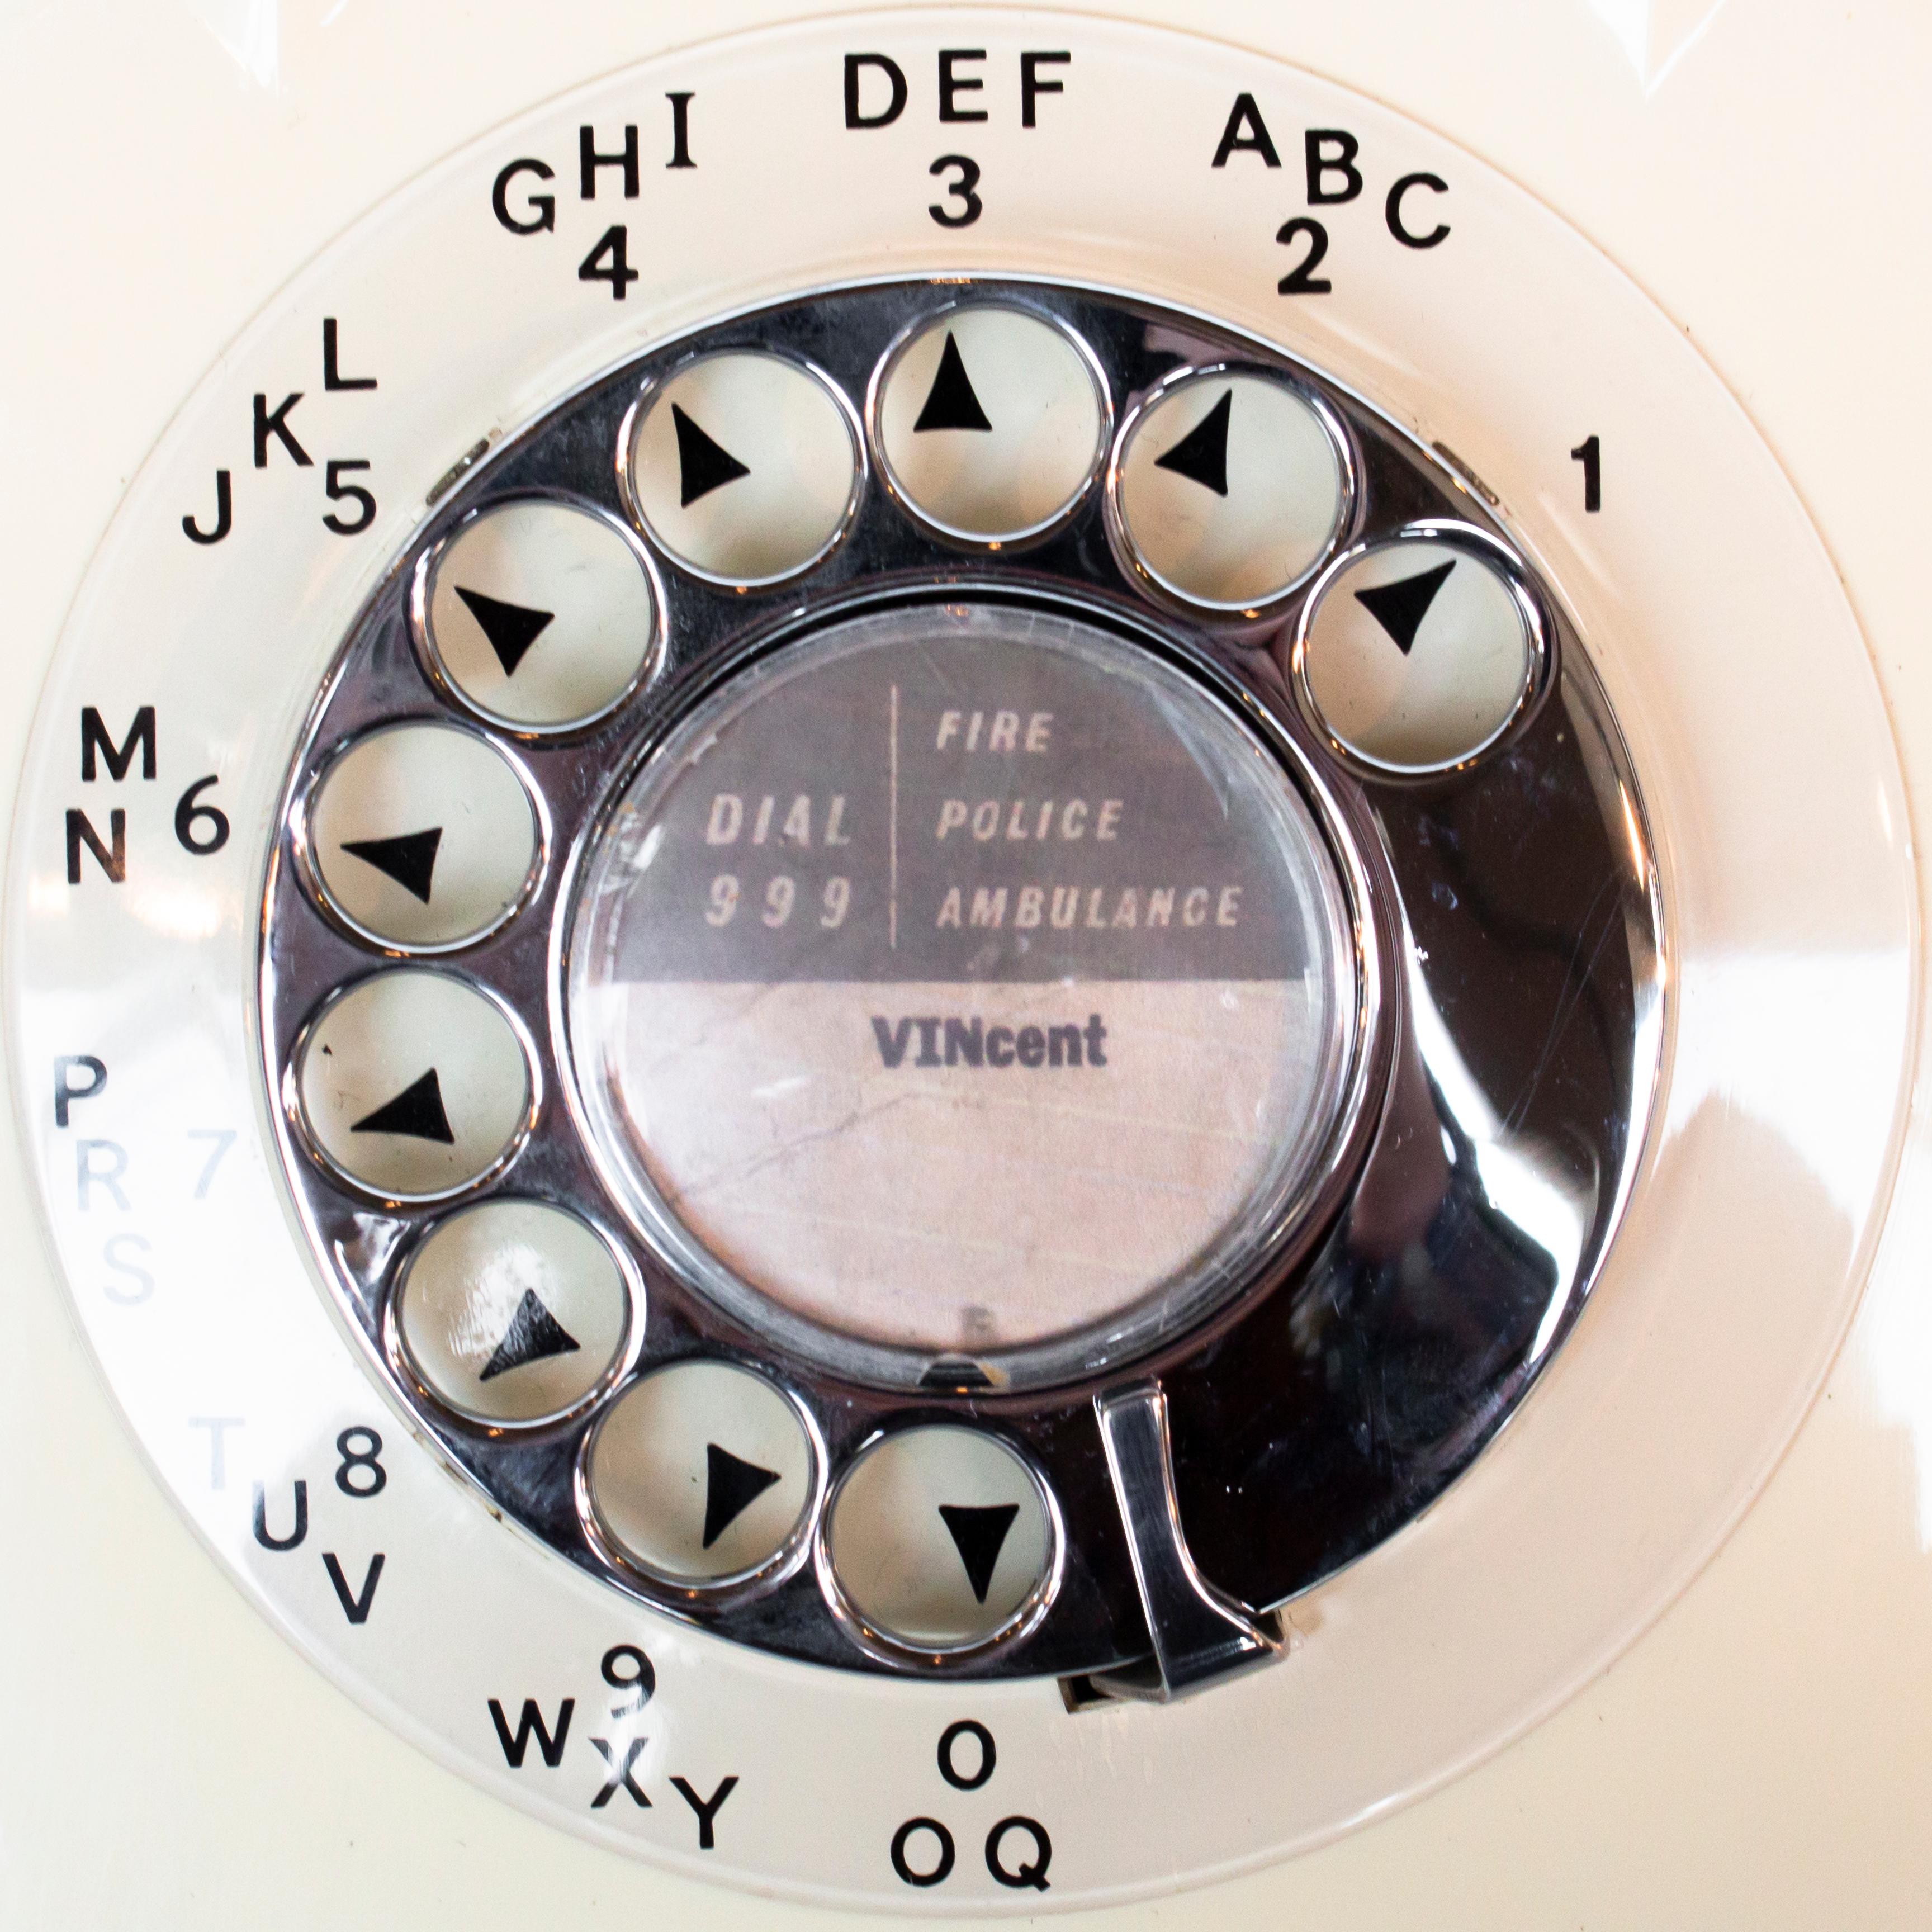 Original 1961 GPO Model 706 Telephone in Ivory, On/Off Bell Feature 1